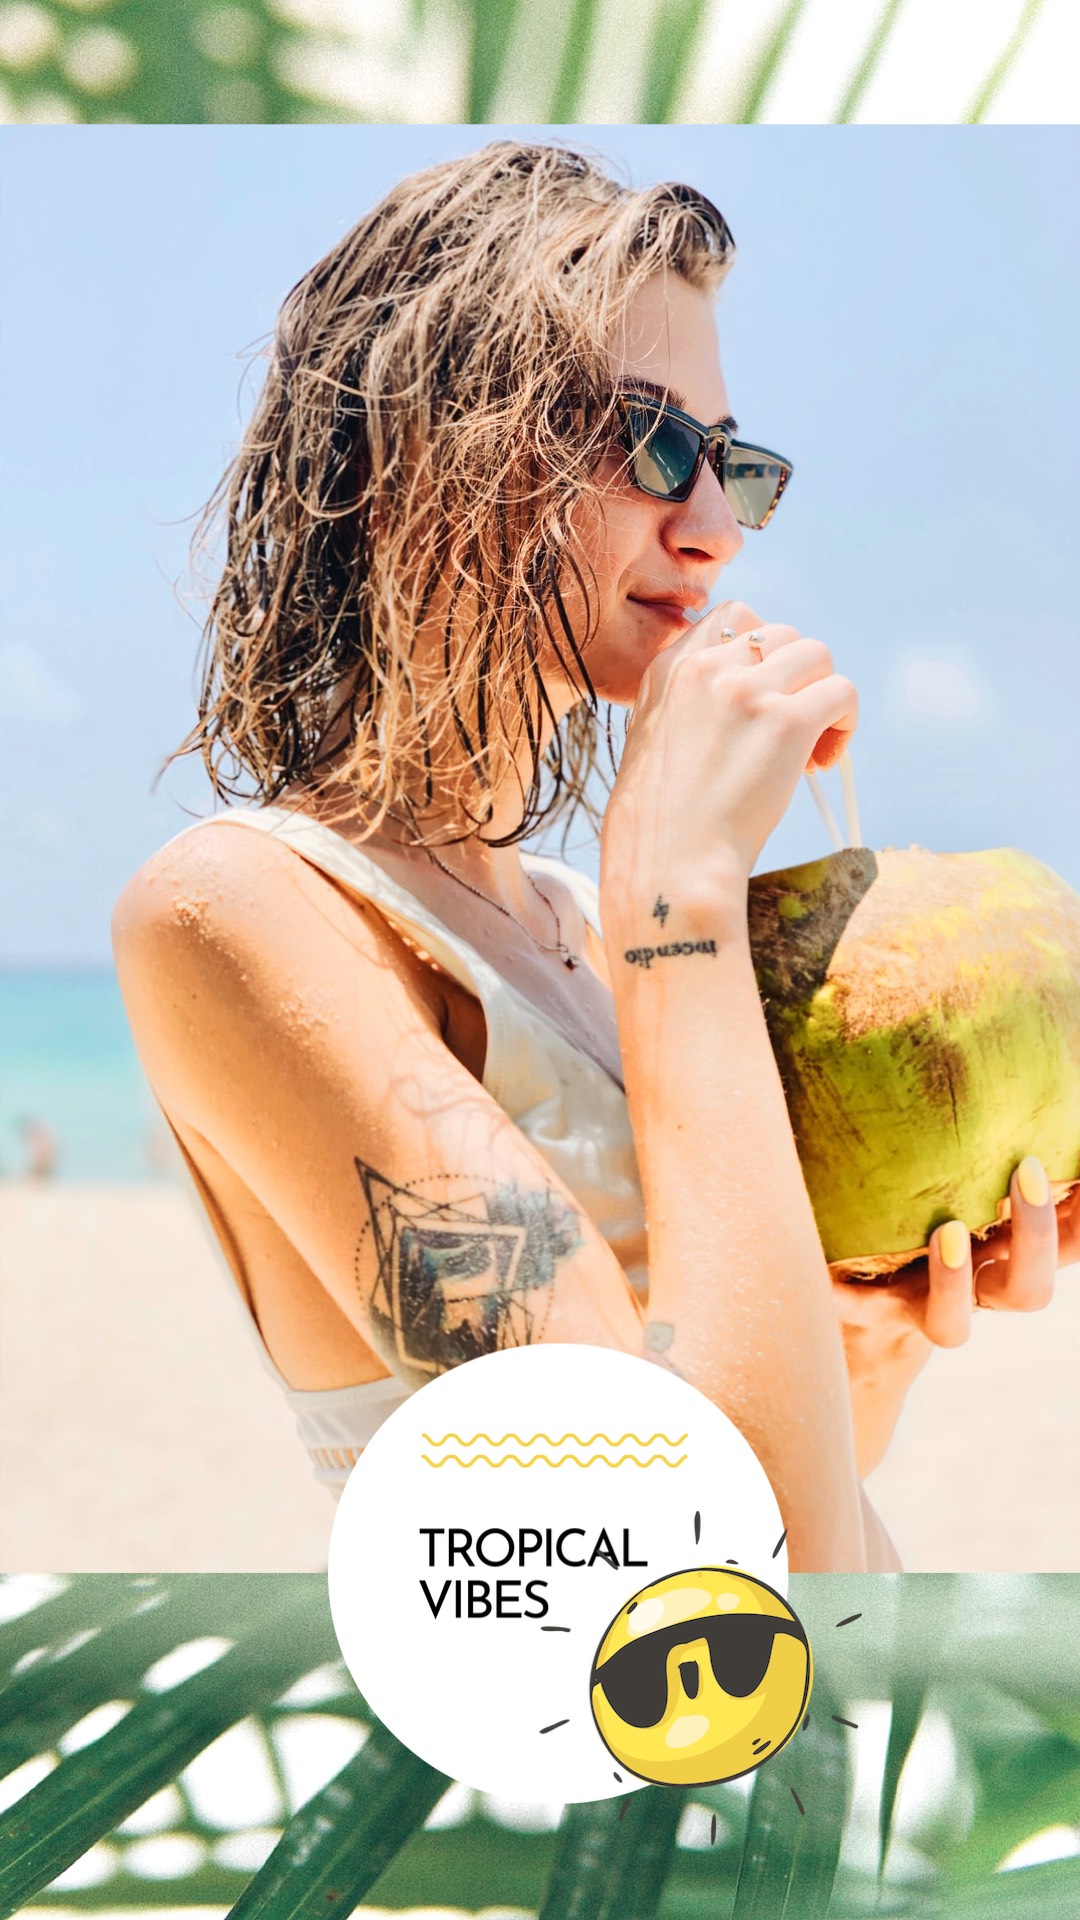 Woman drinking a coconut on the beach tropical vibes summer story template